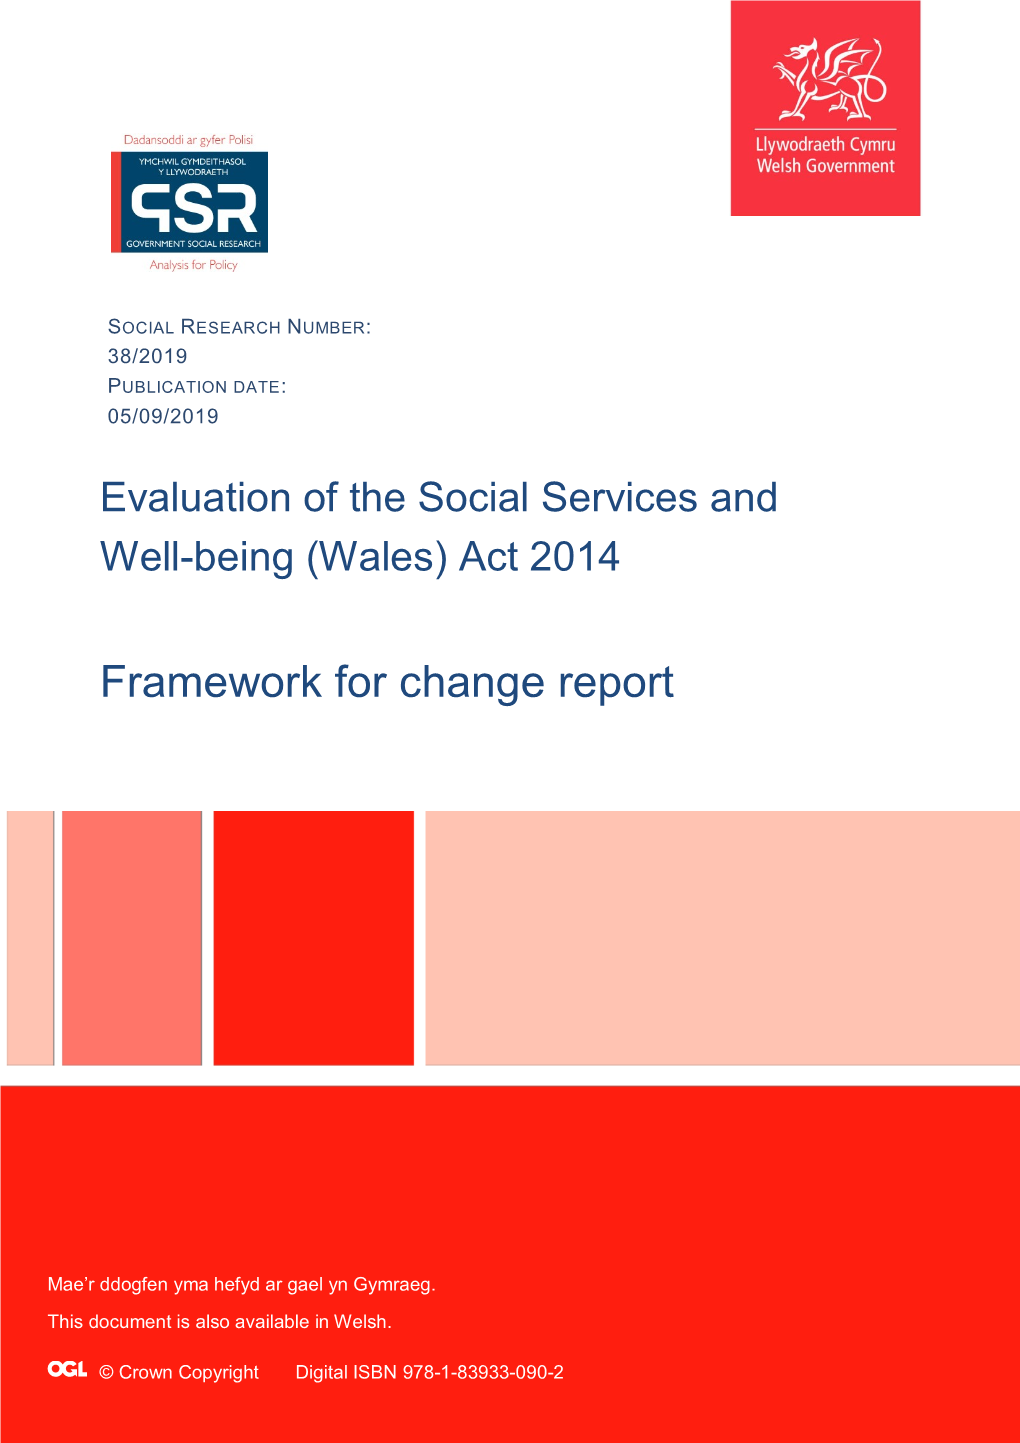 Evaluation of the Social Services and Well-Being (Wales) Act 2014